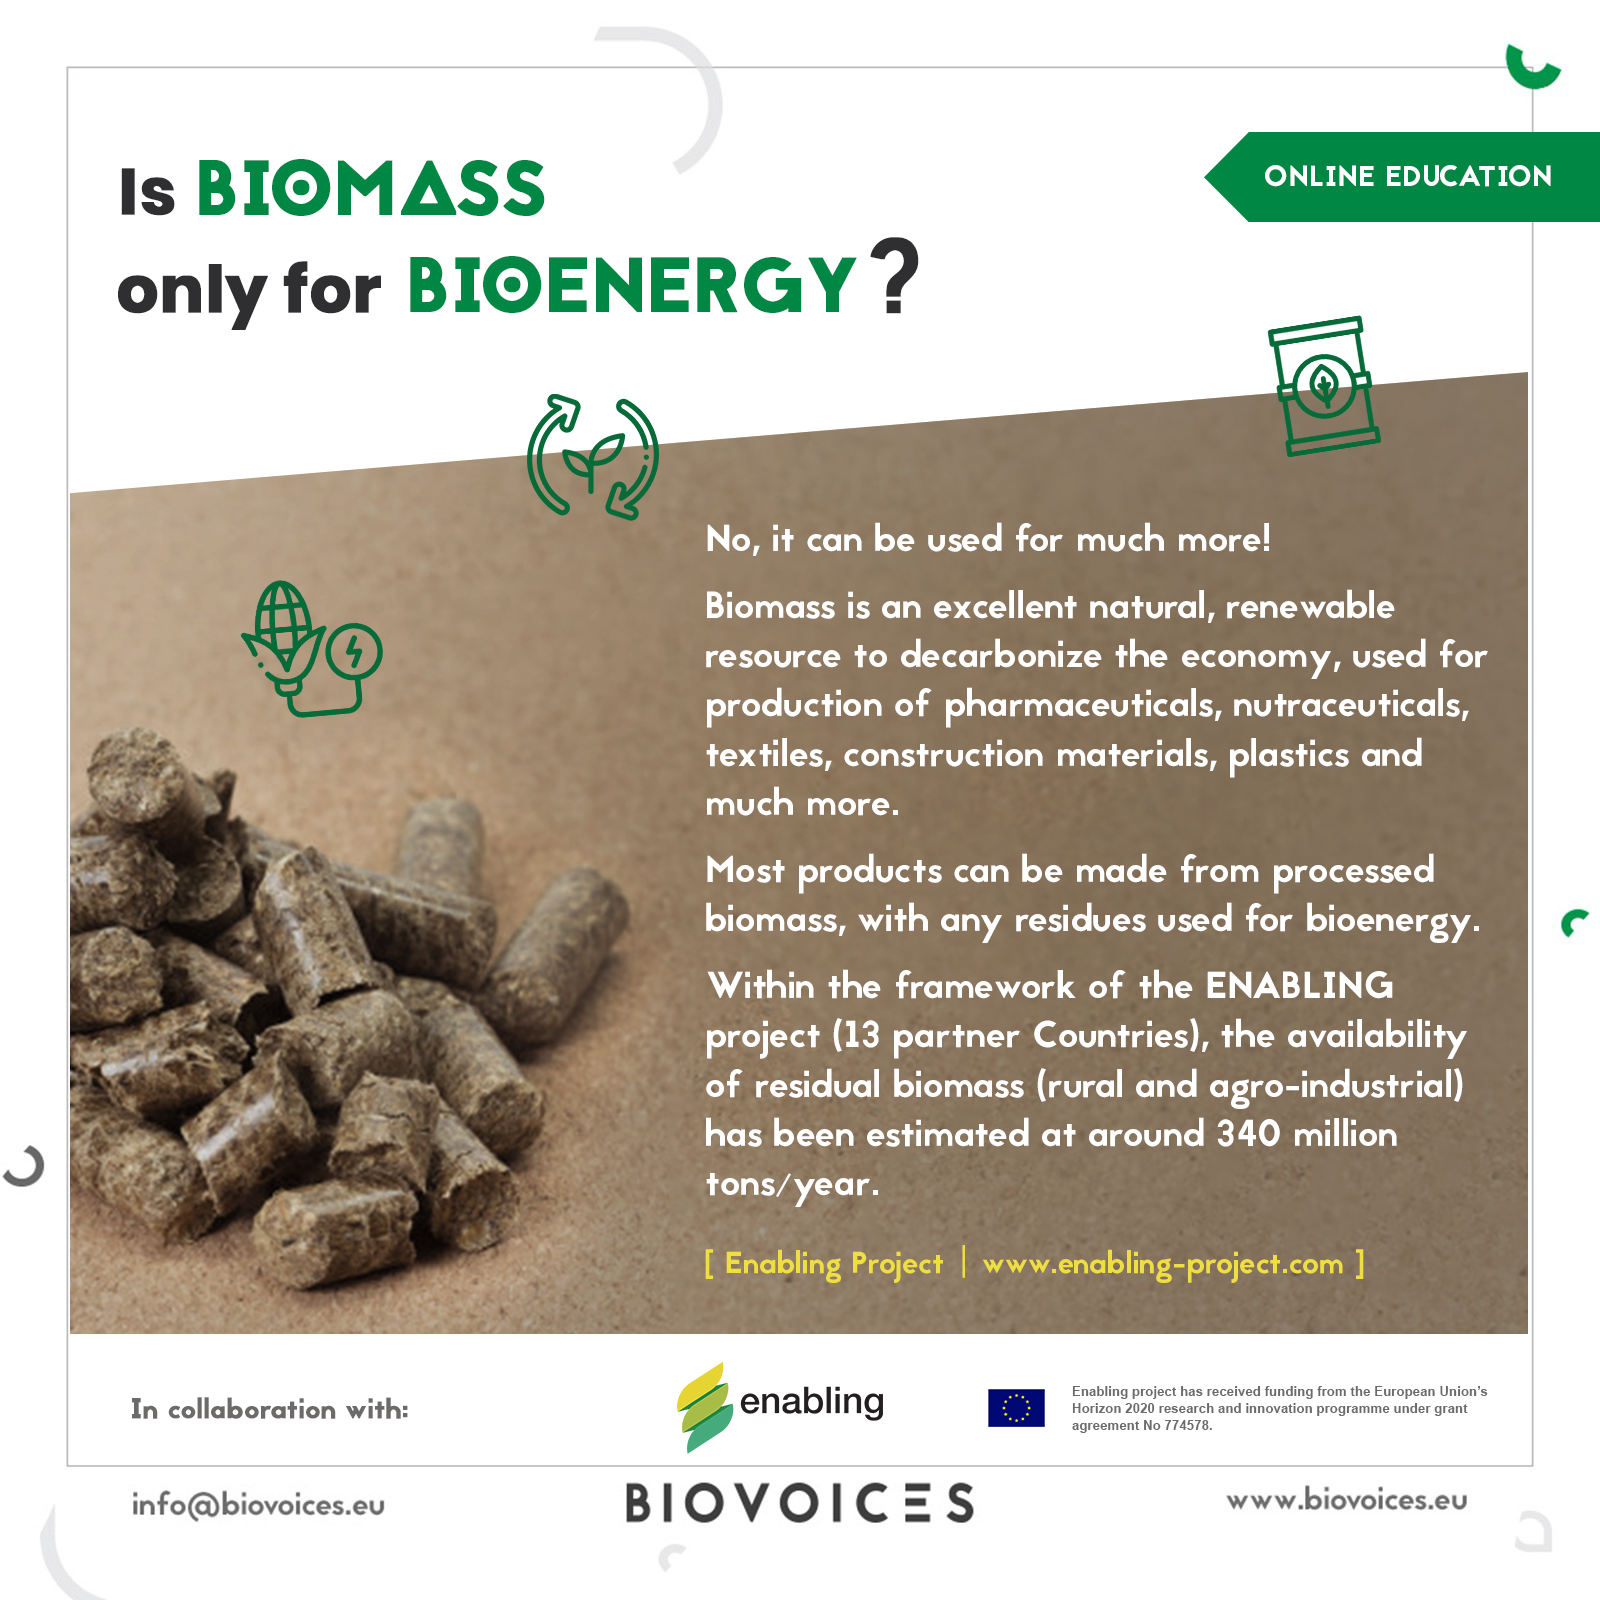 ENABLING_Biovoices campaign.png